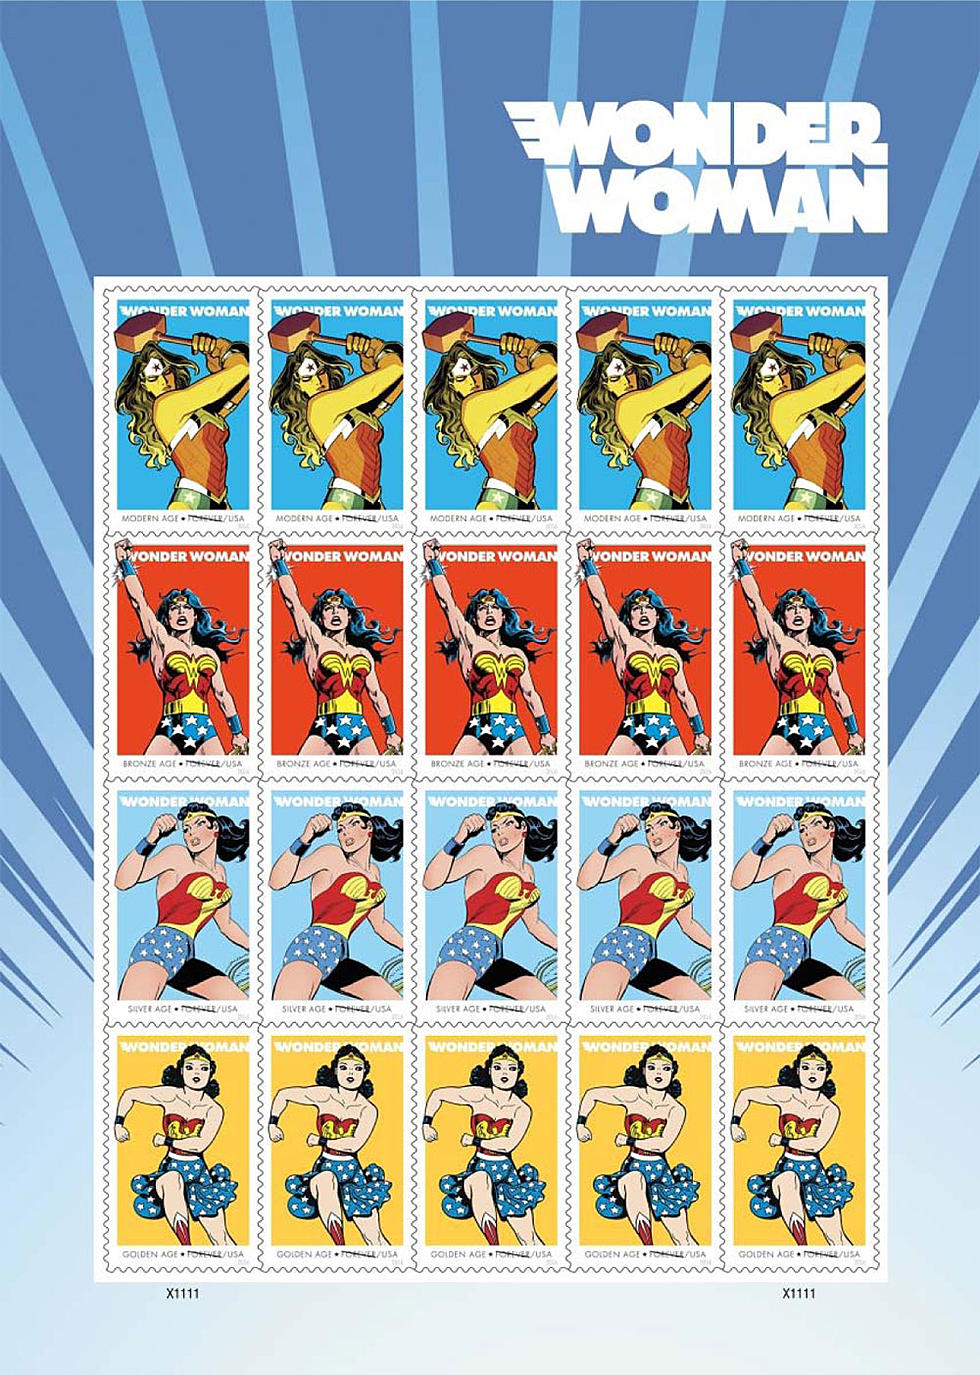 USPS Celebrates Wonder Woman&#8217;s 75th Anniversary With New Line Of Stamps [SDCC 2016]